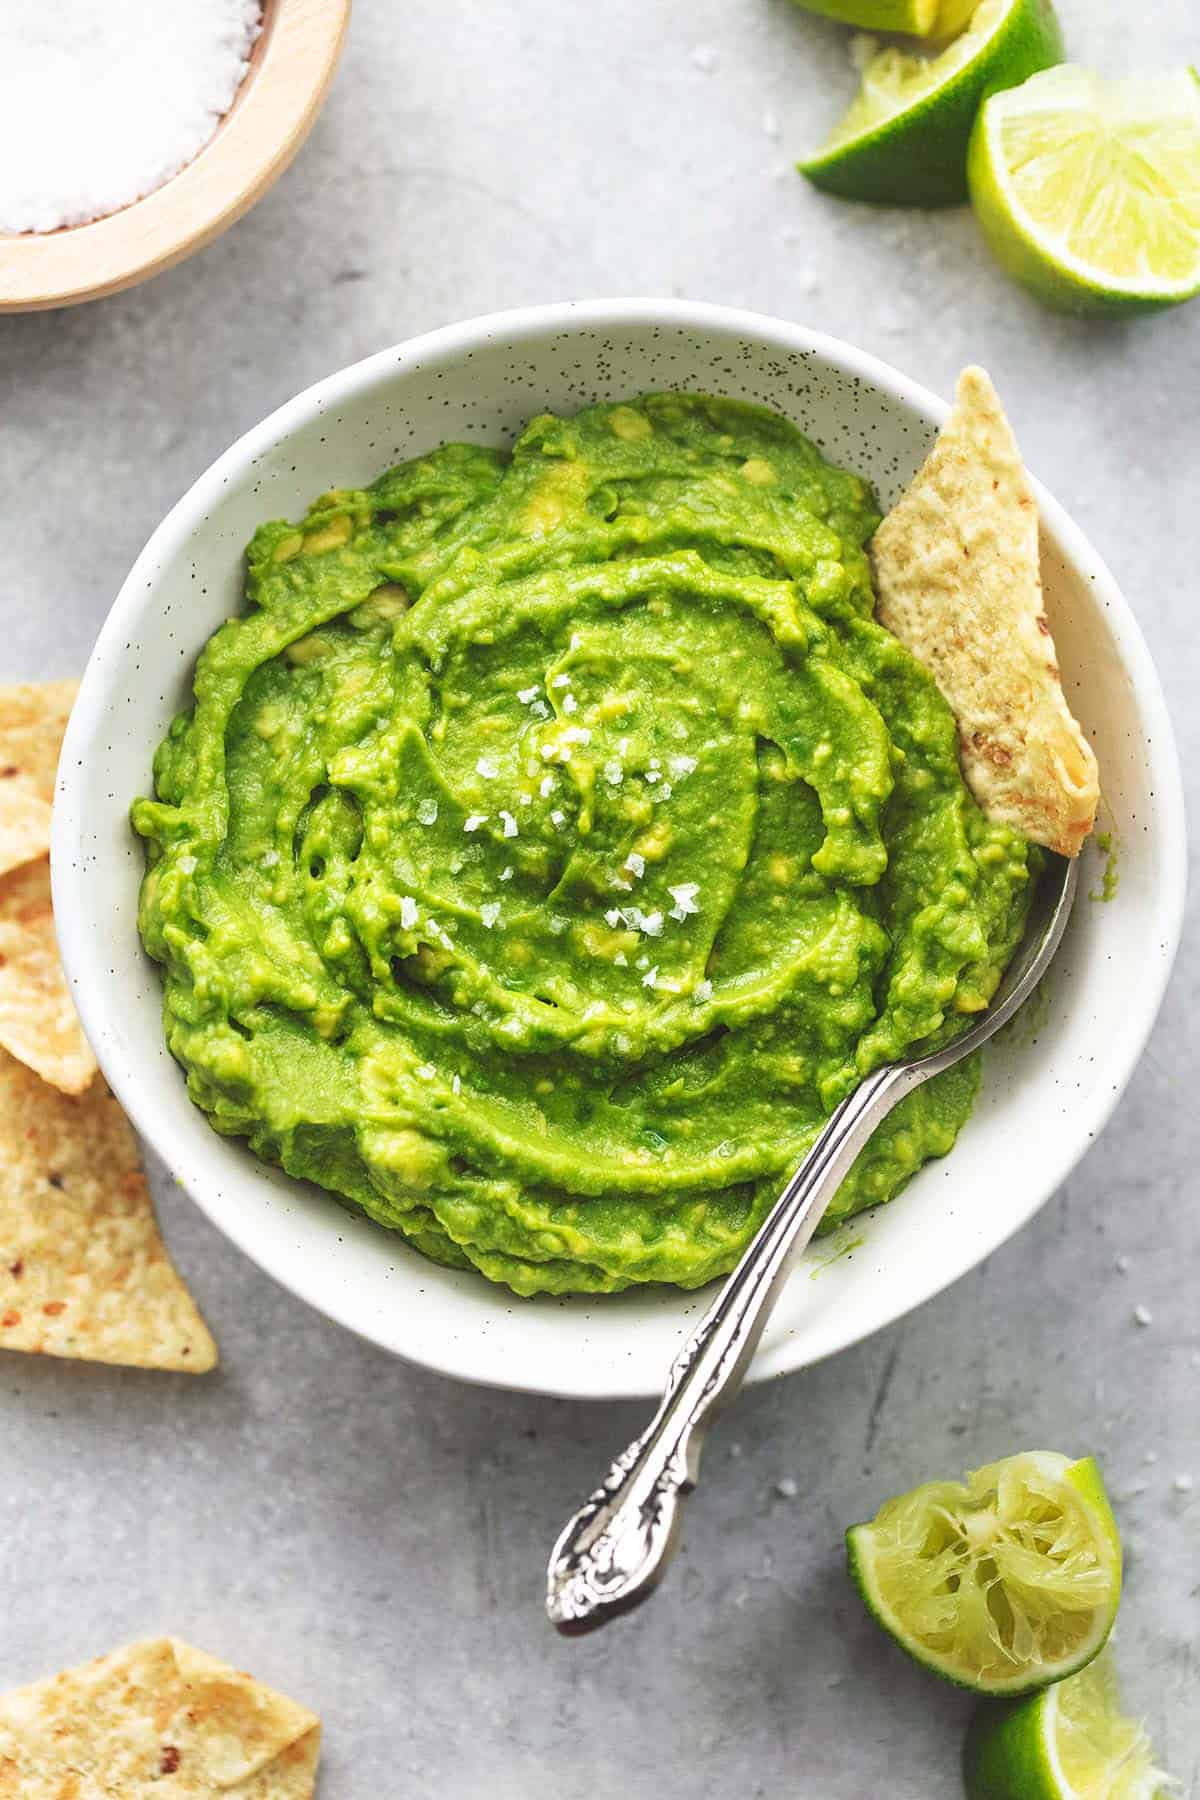 Easy Guacamole Recipe - Best Homemade Guac You'll Ever Eat